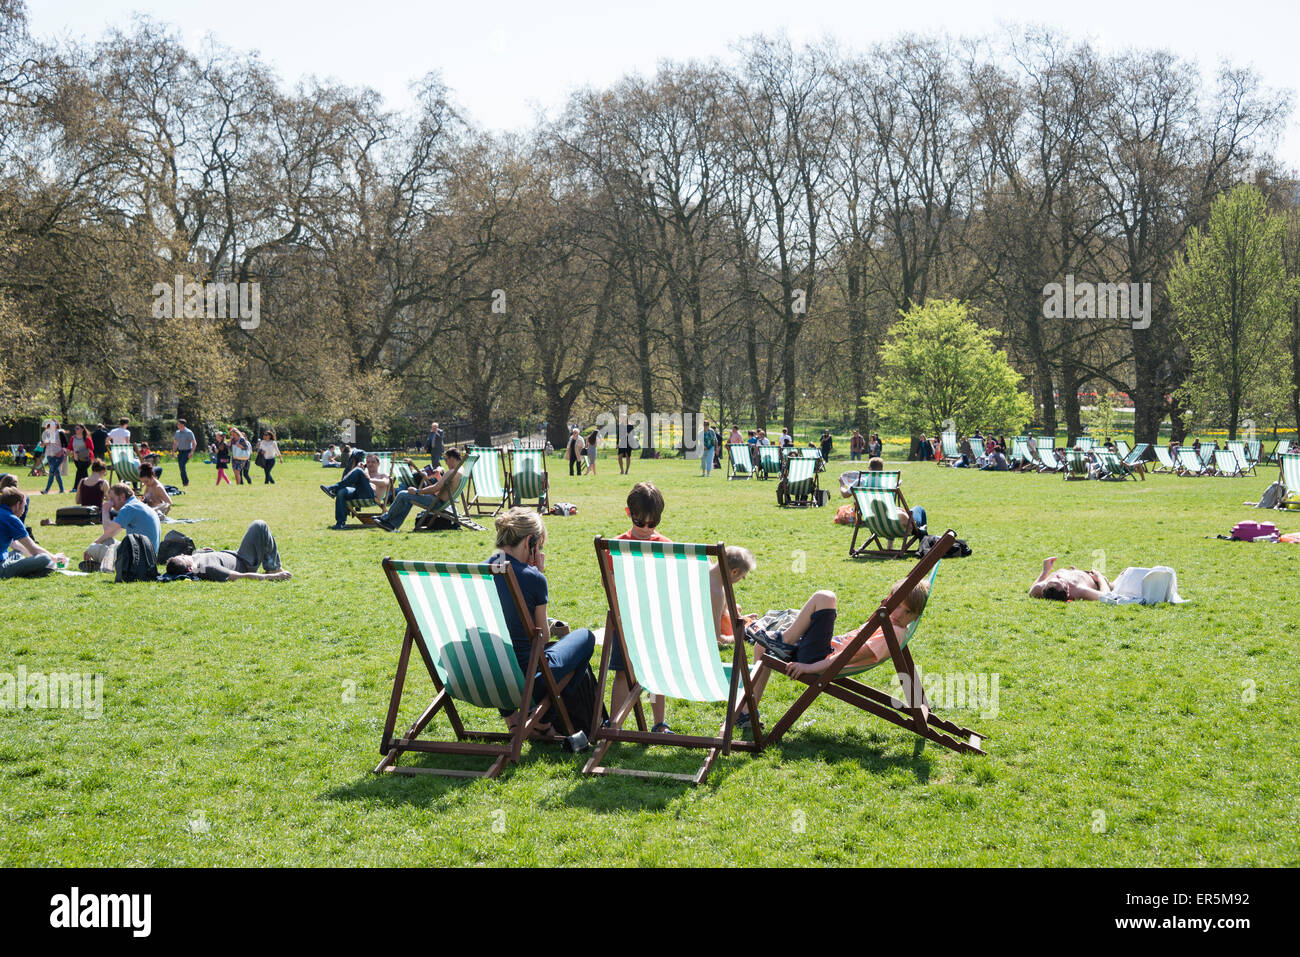 The Green Park in spring, City of Westminster, Greater London, England, United Kingdom Stock Photo